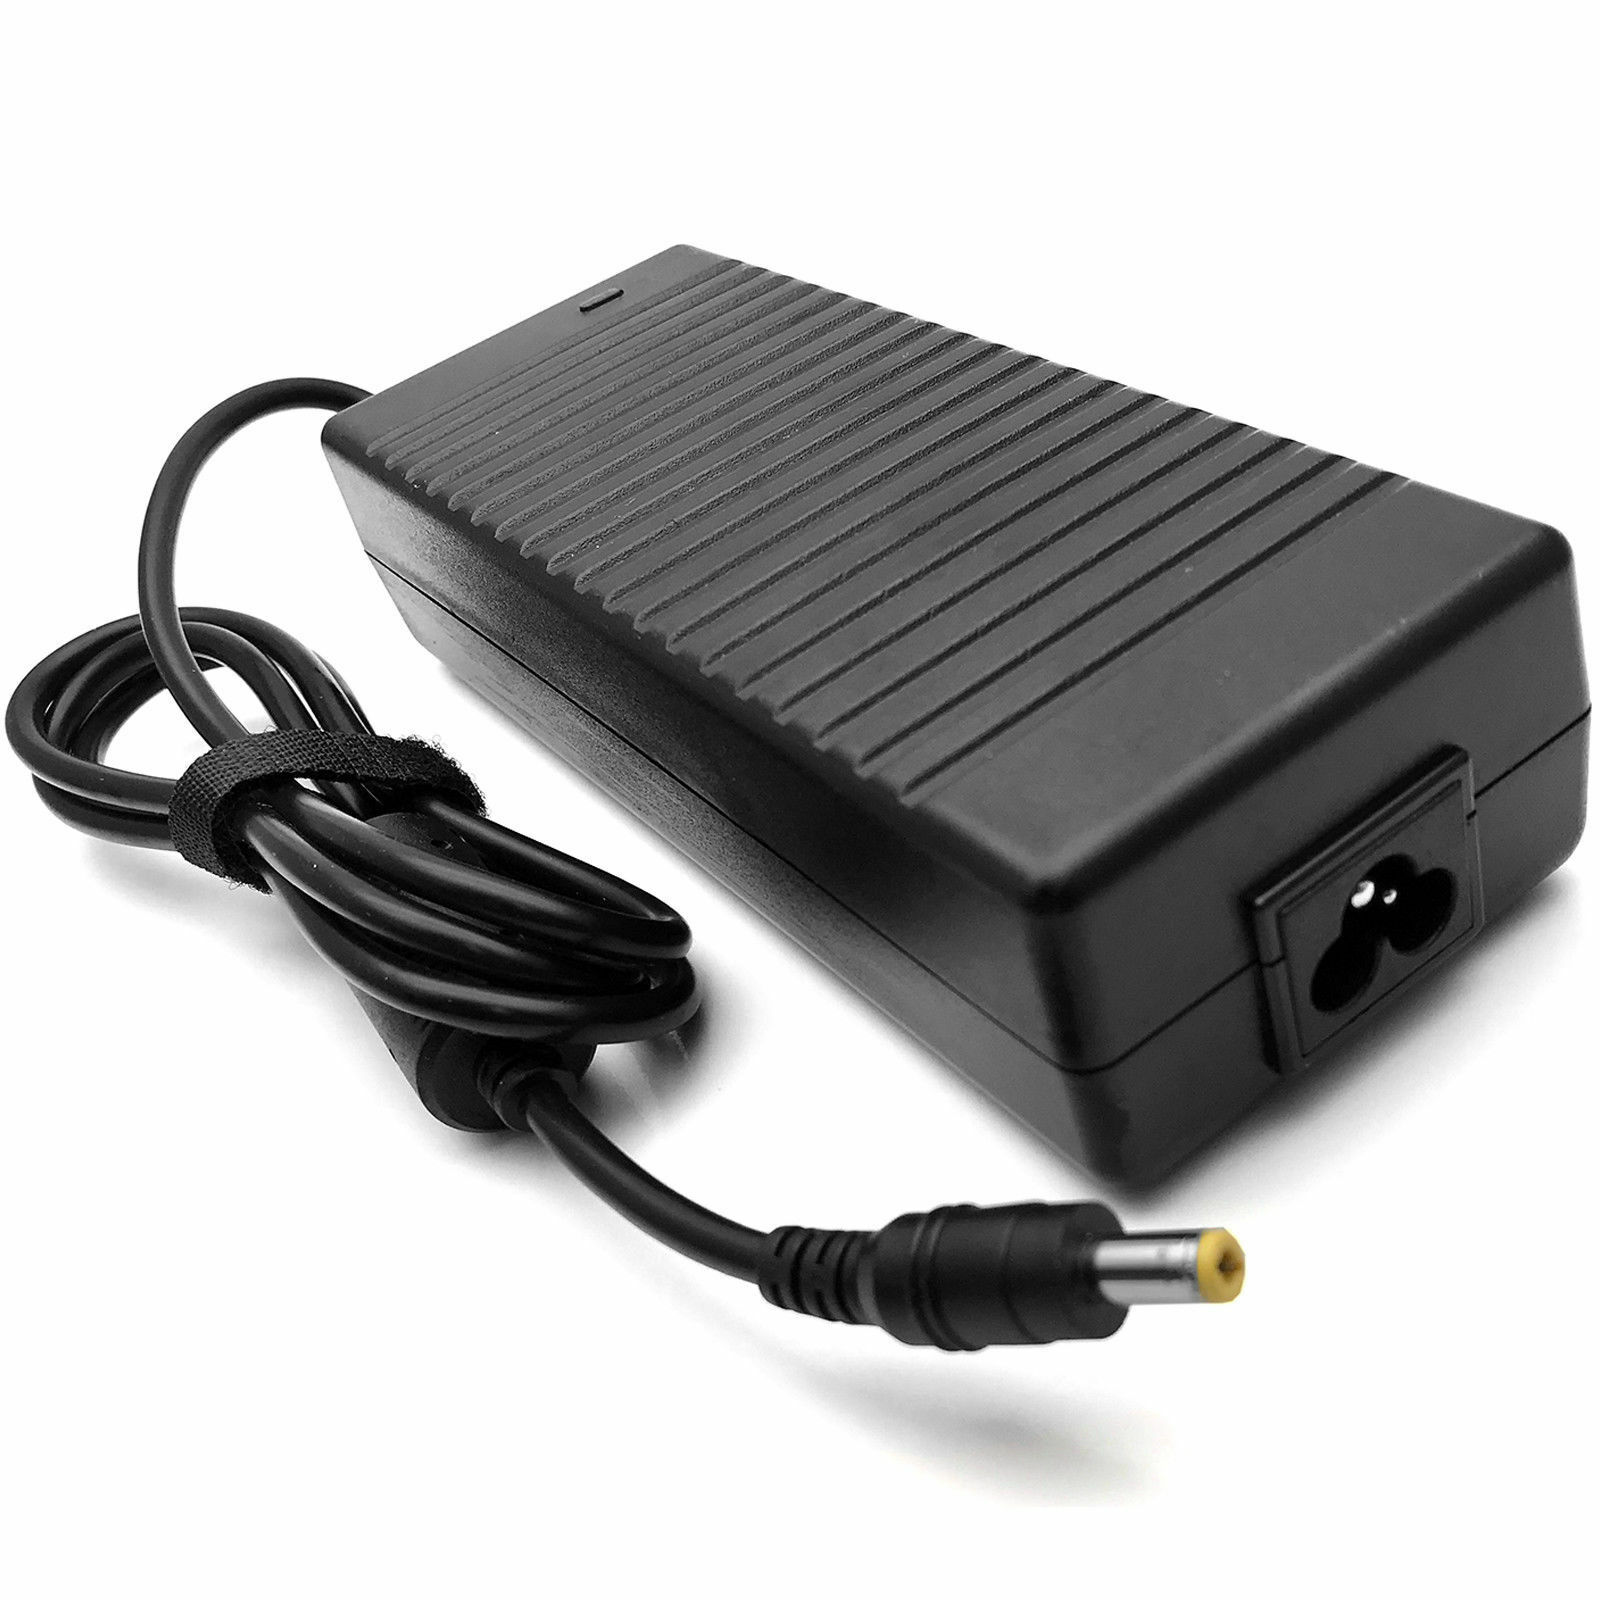 15.6V AC Adapter Charger For Panasonic Toughbook CF-19 CF31 CF52 CF-53 CF-53S - image 2 of 5